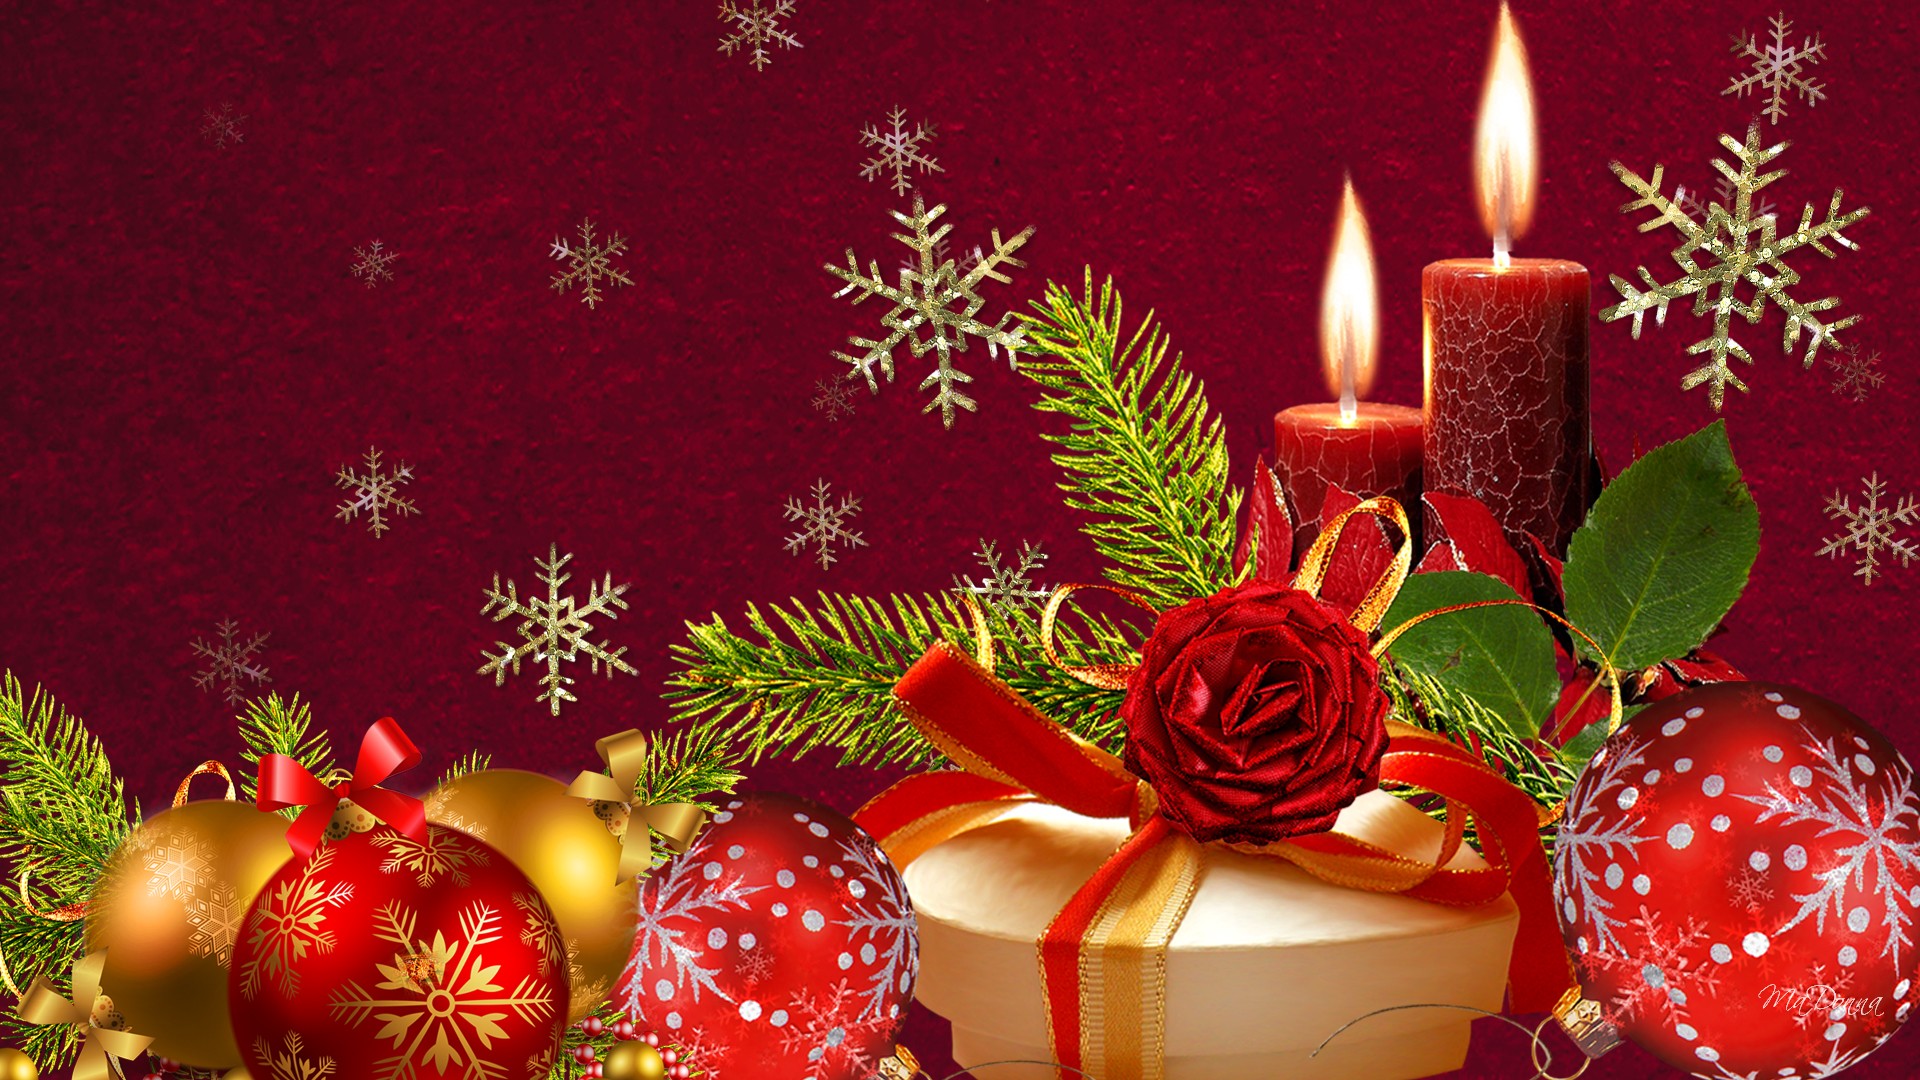 Christmas Wallpaper Download Free Wallpapers9